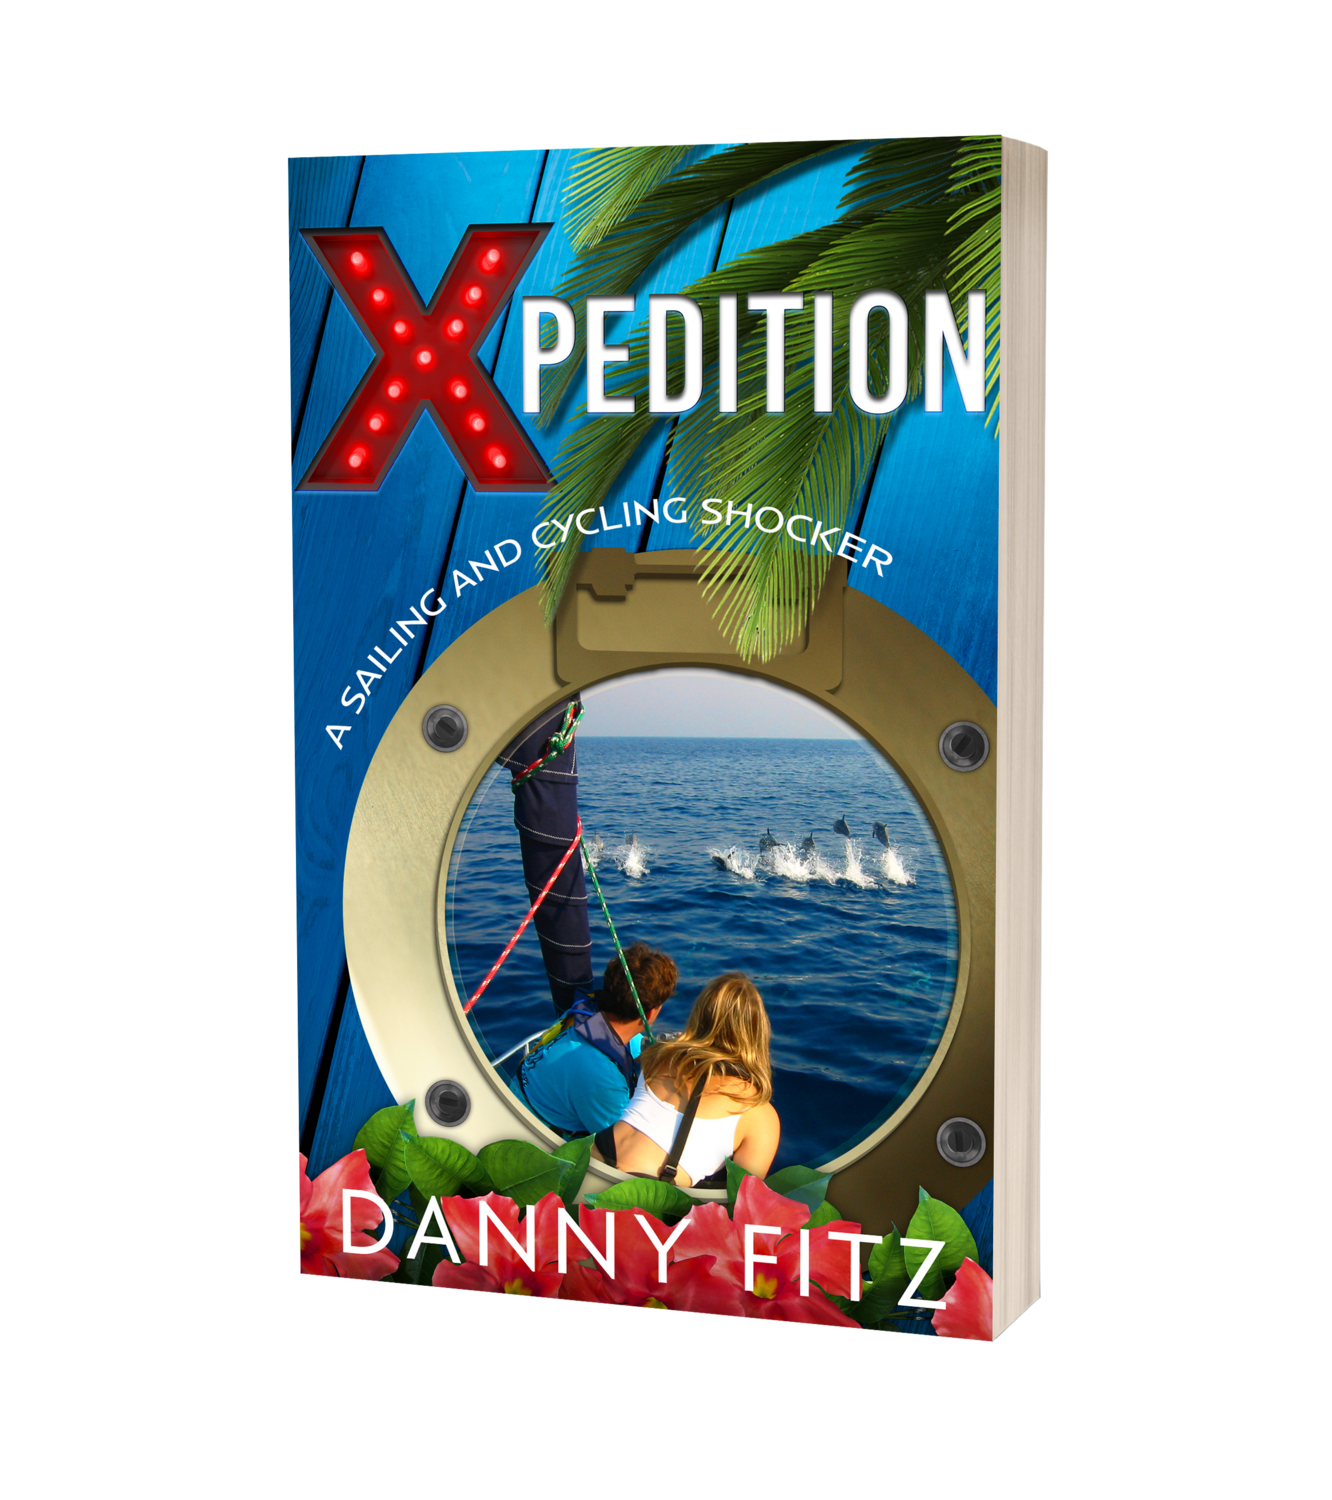 Xpedition - A Sailing And Cycling Shocker - Signed Paperback Edition